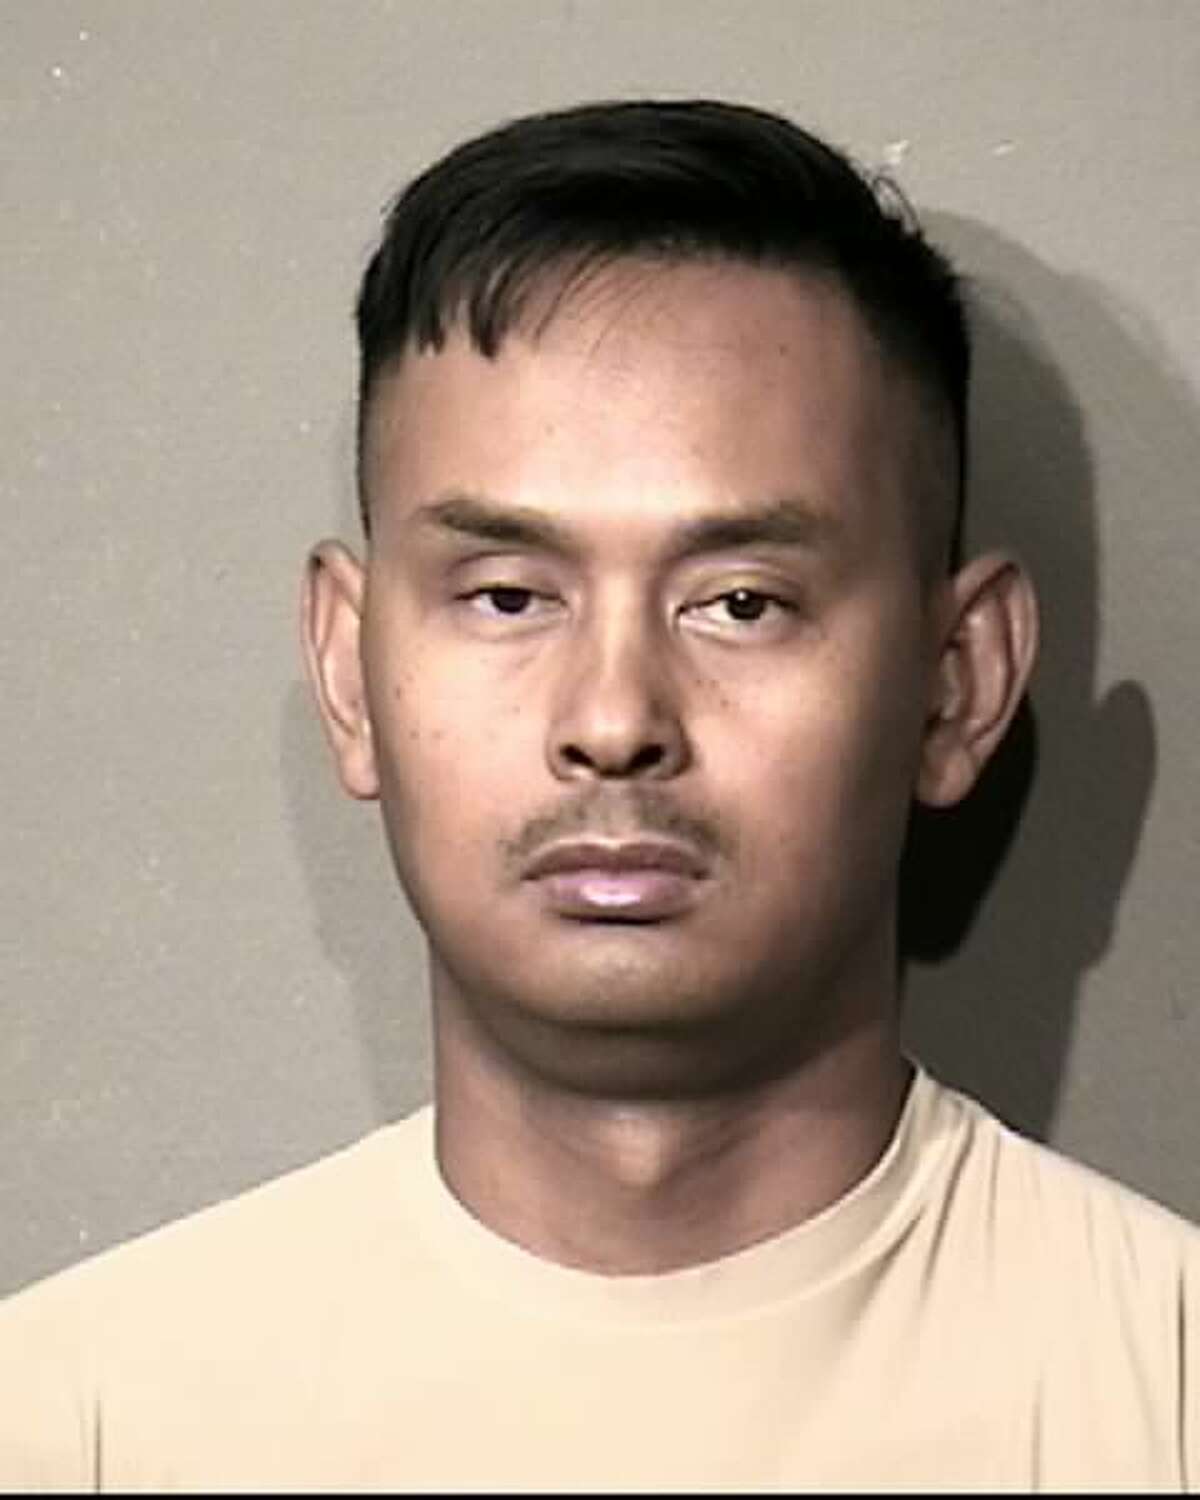 Yeuy Teang was arrested on a misdemeanor prostitution-related charge as part of 10-day vice operation by the Houston police department in the week leading up to the Super Bowl.